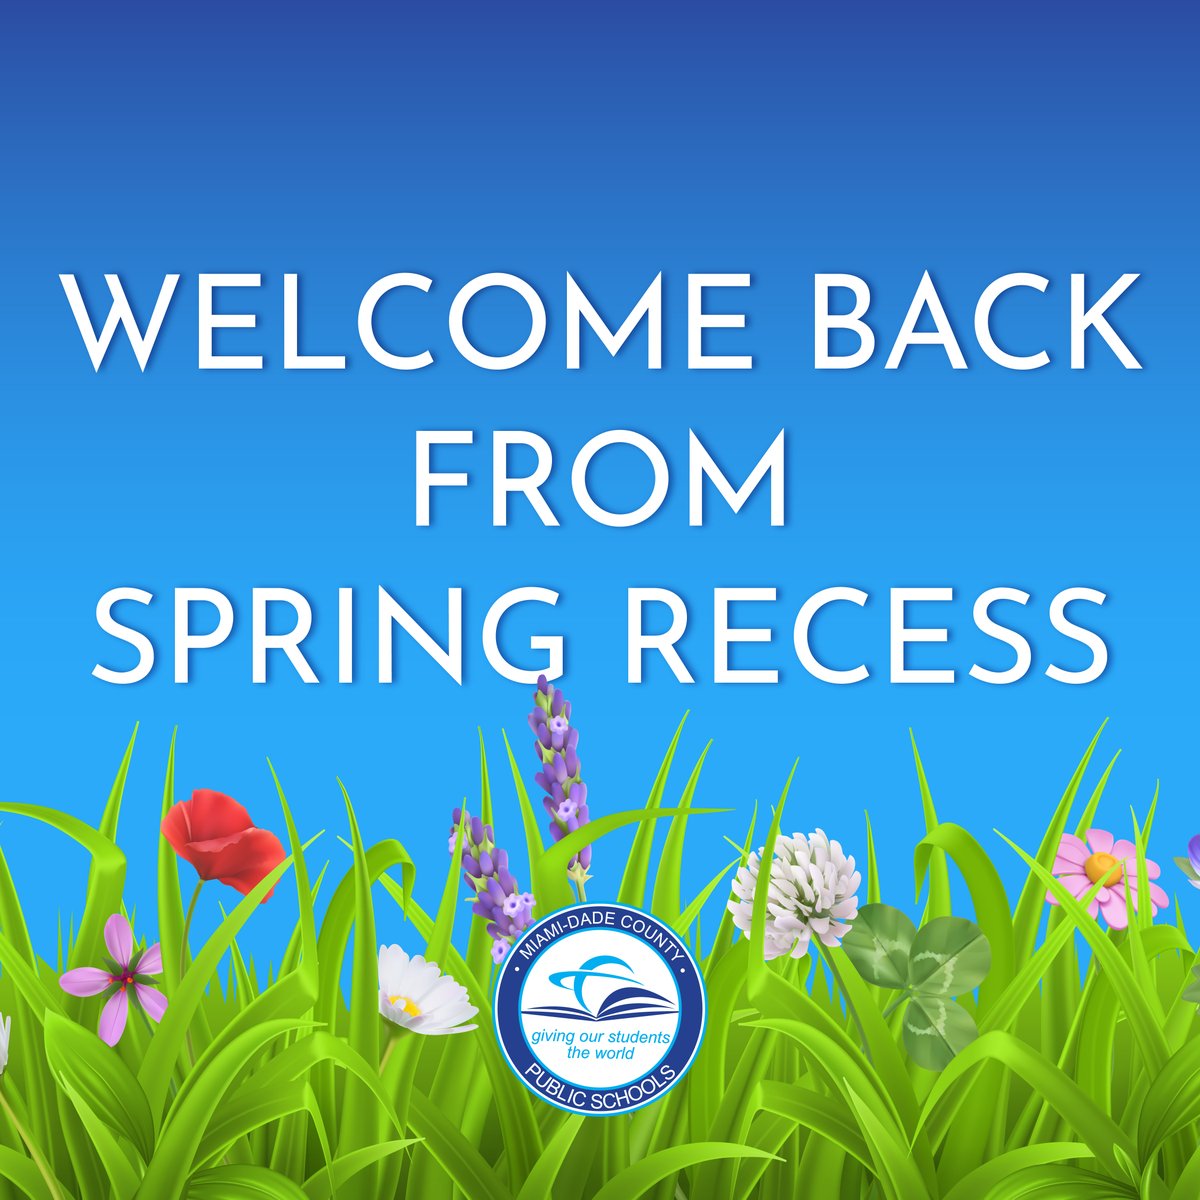 Students, hope you had a fun and relaxing Spring Recess! As school resumes tomorrow, let’s continue the exciting journey of discovery and academic growth. Looking forward to a fantastic remainder of the school year ahead! #YourBestChoiceMDCPS